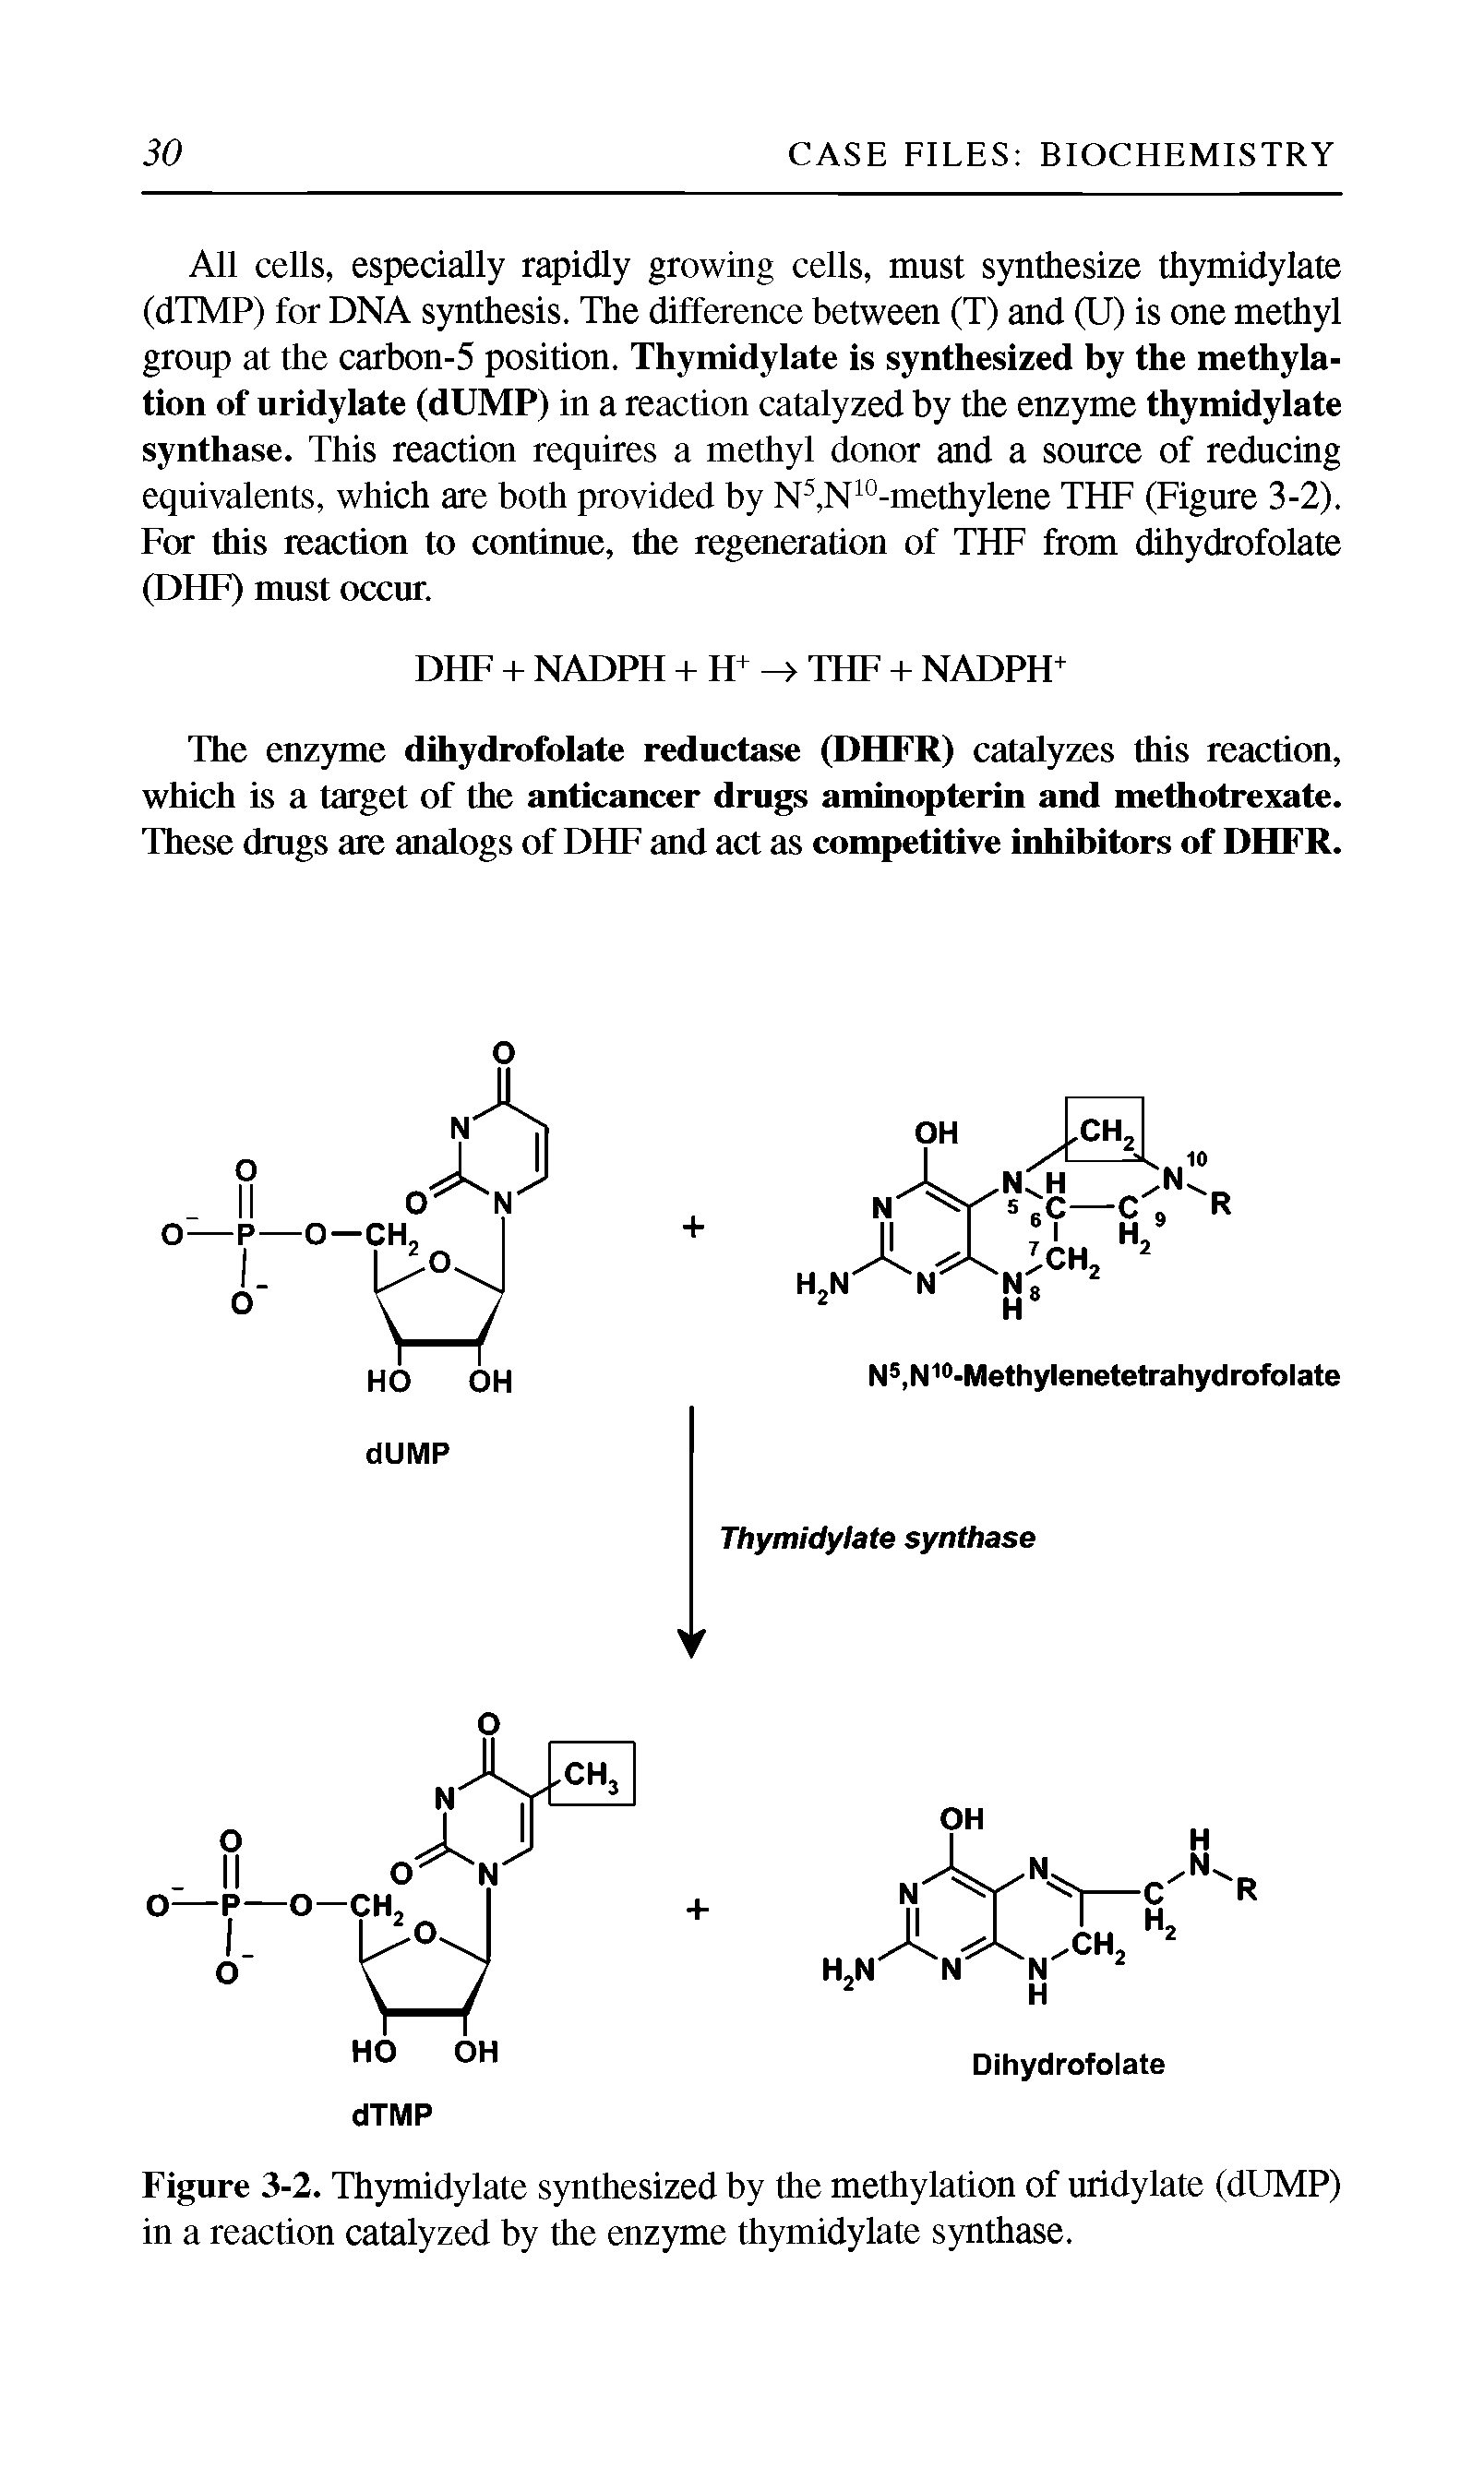 Figure 3-2. Thymidylate synthesized by the methylation of uridylate (dUMP) in a reaction catalyzed by the enzyme thymidylate synthase.